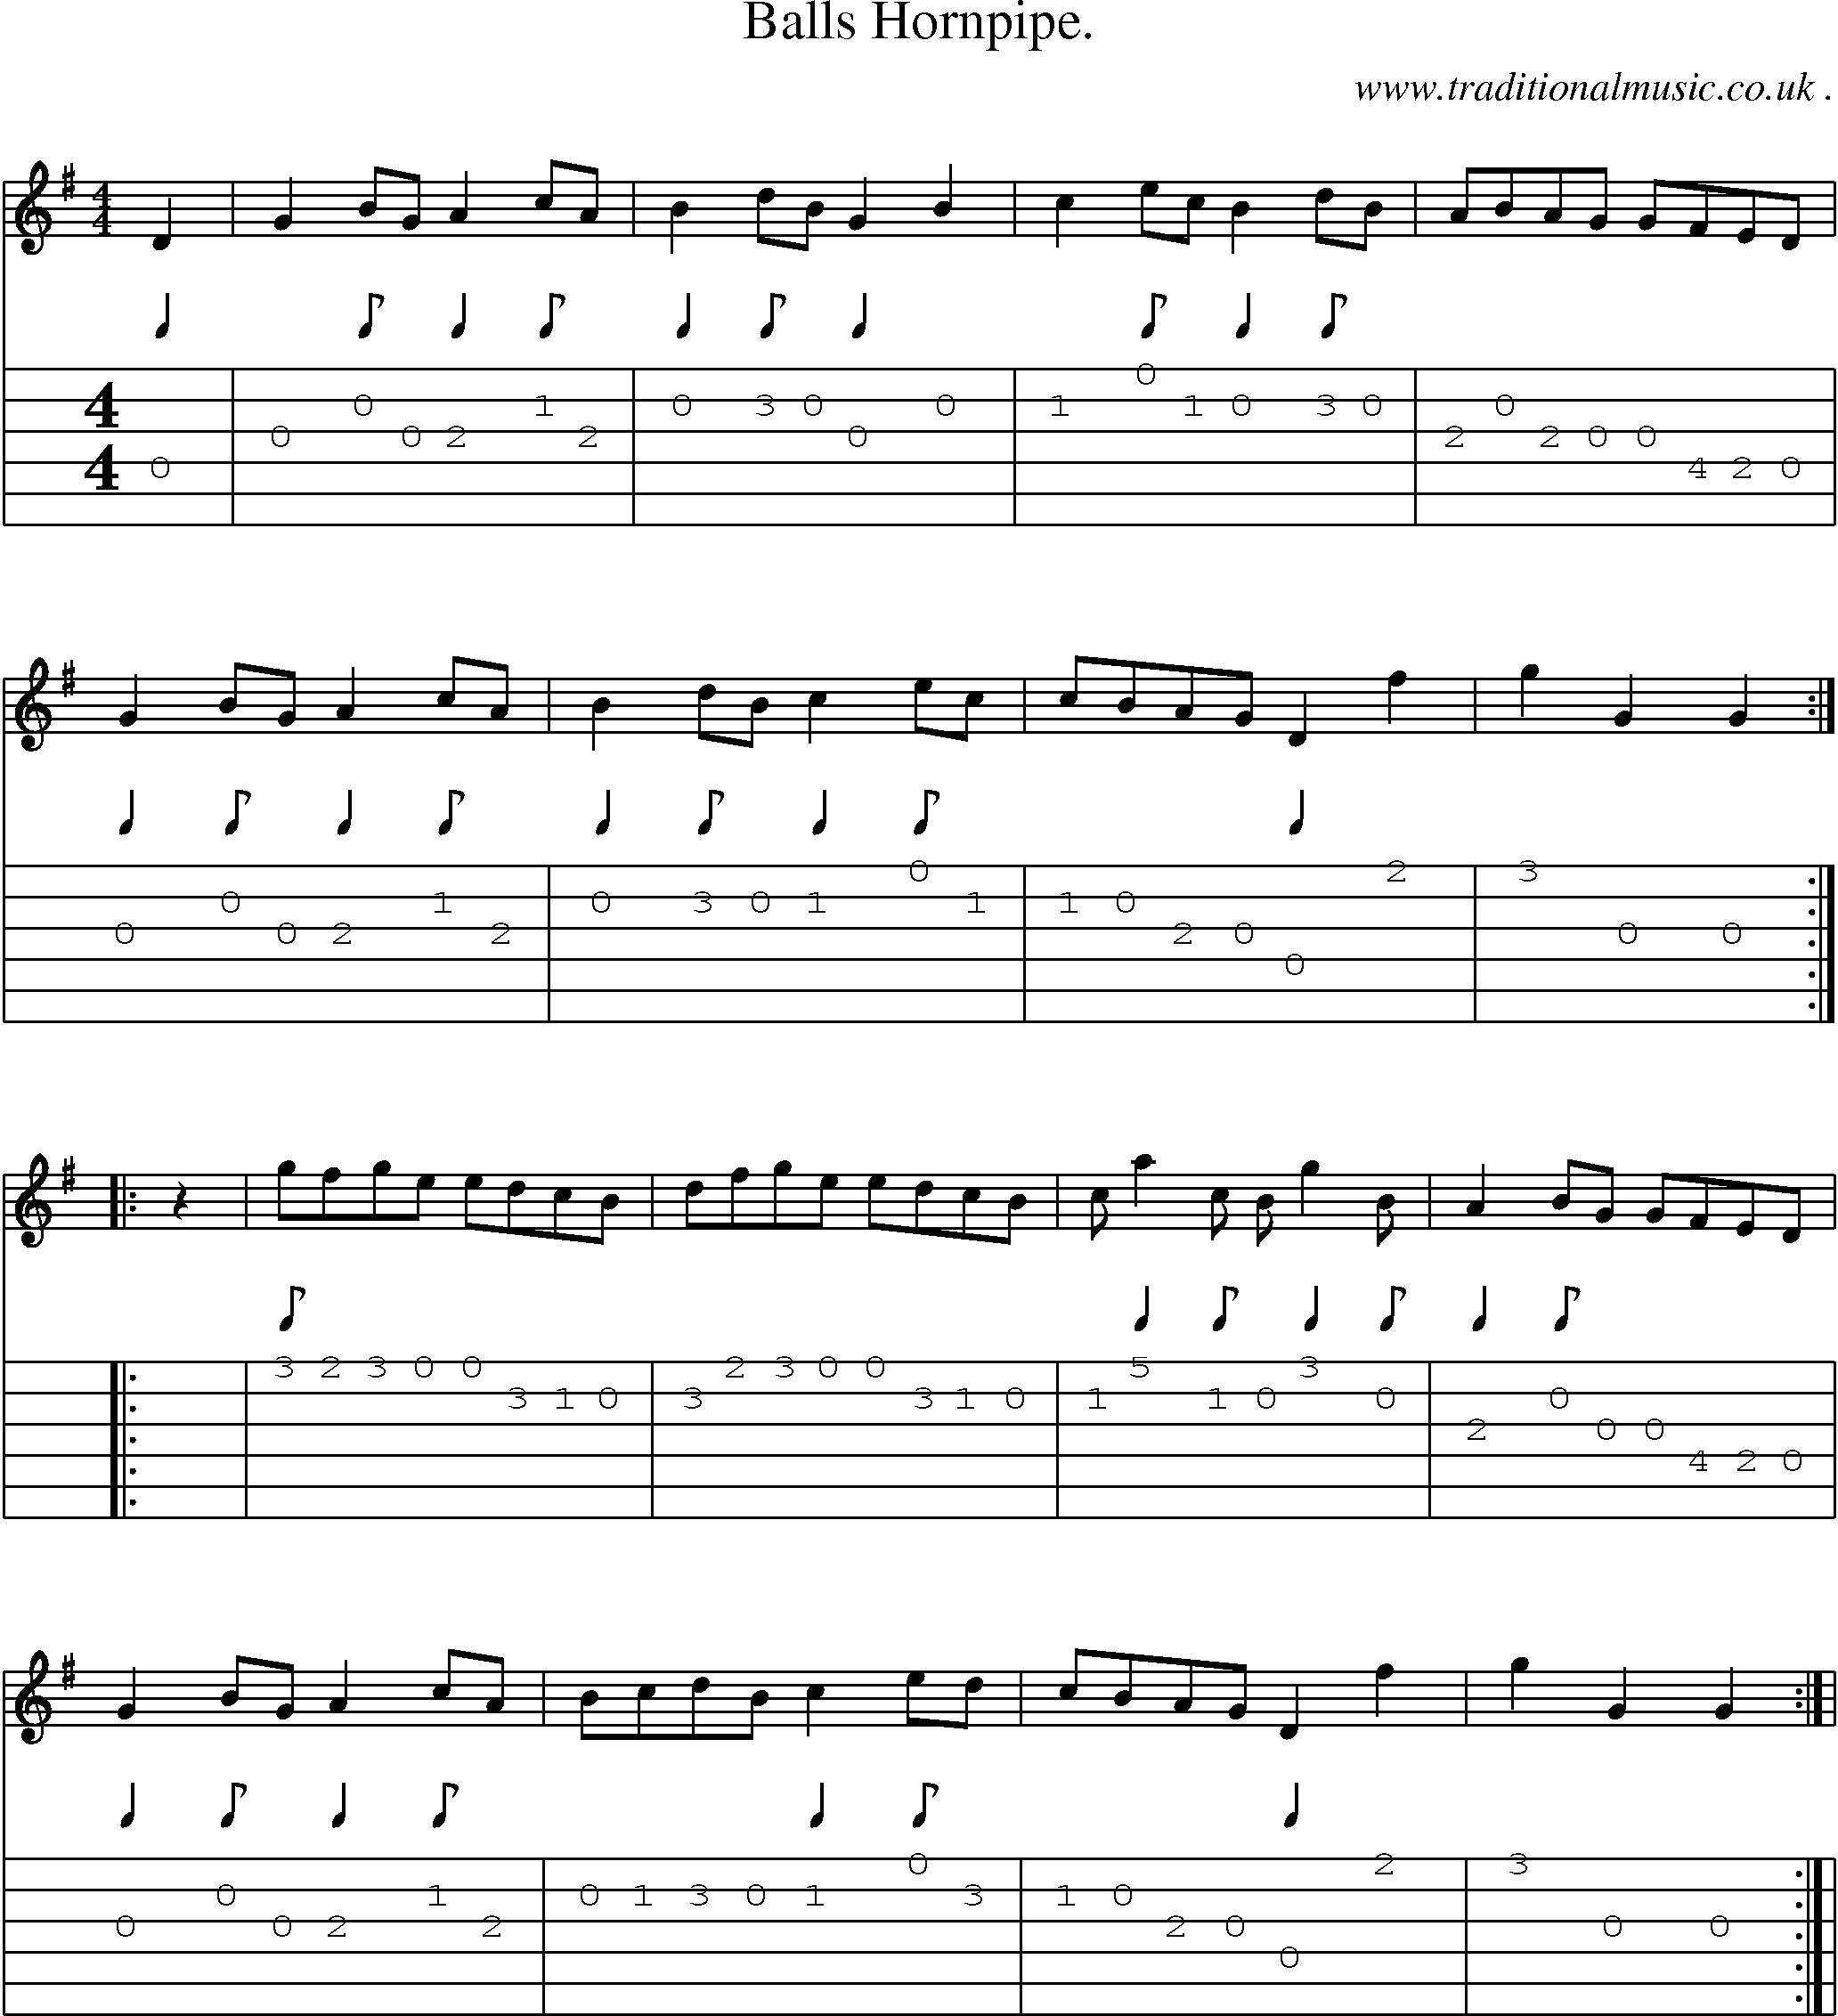 Sheet-Music and Guitar Tabs for Balls Hornpipe